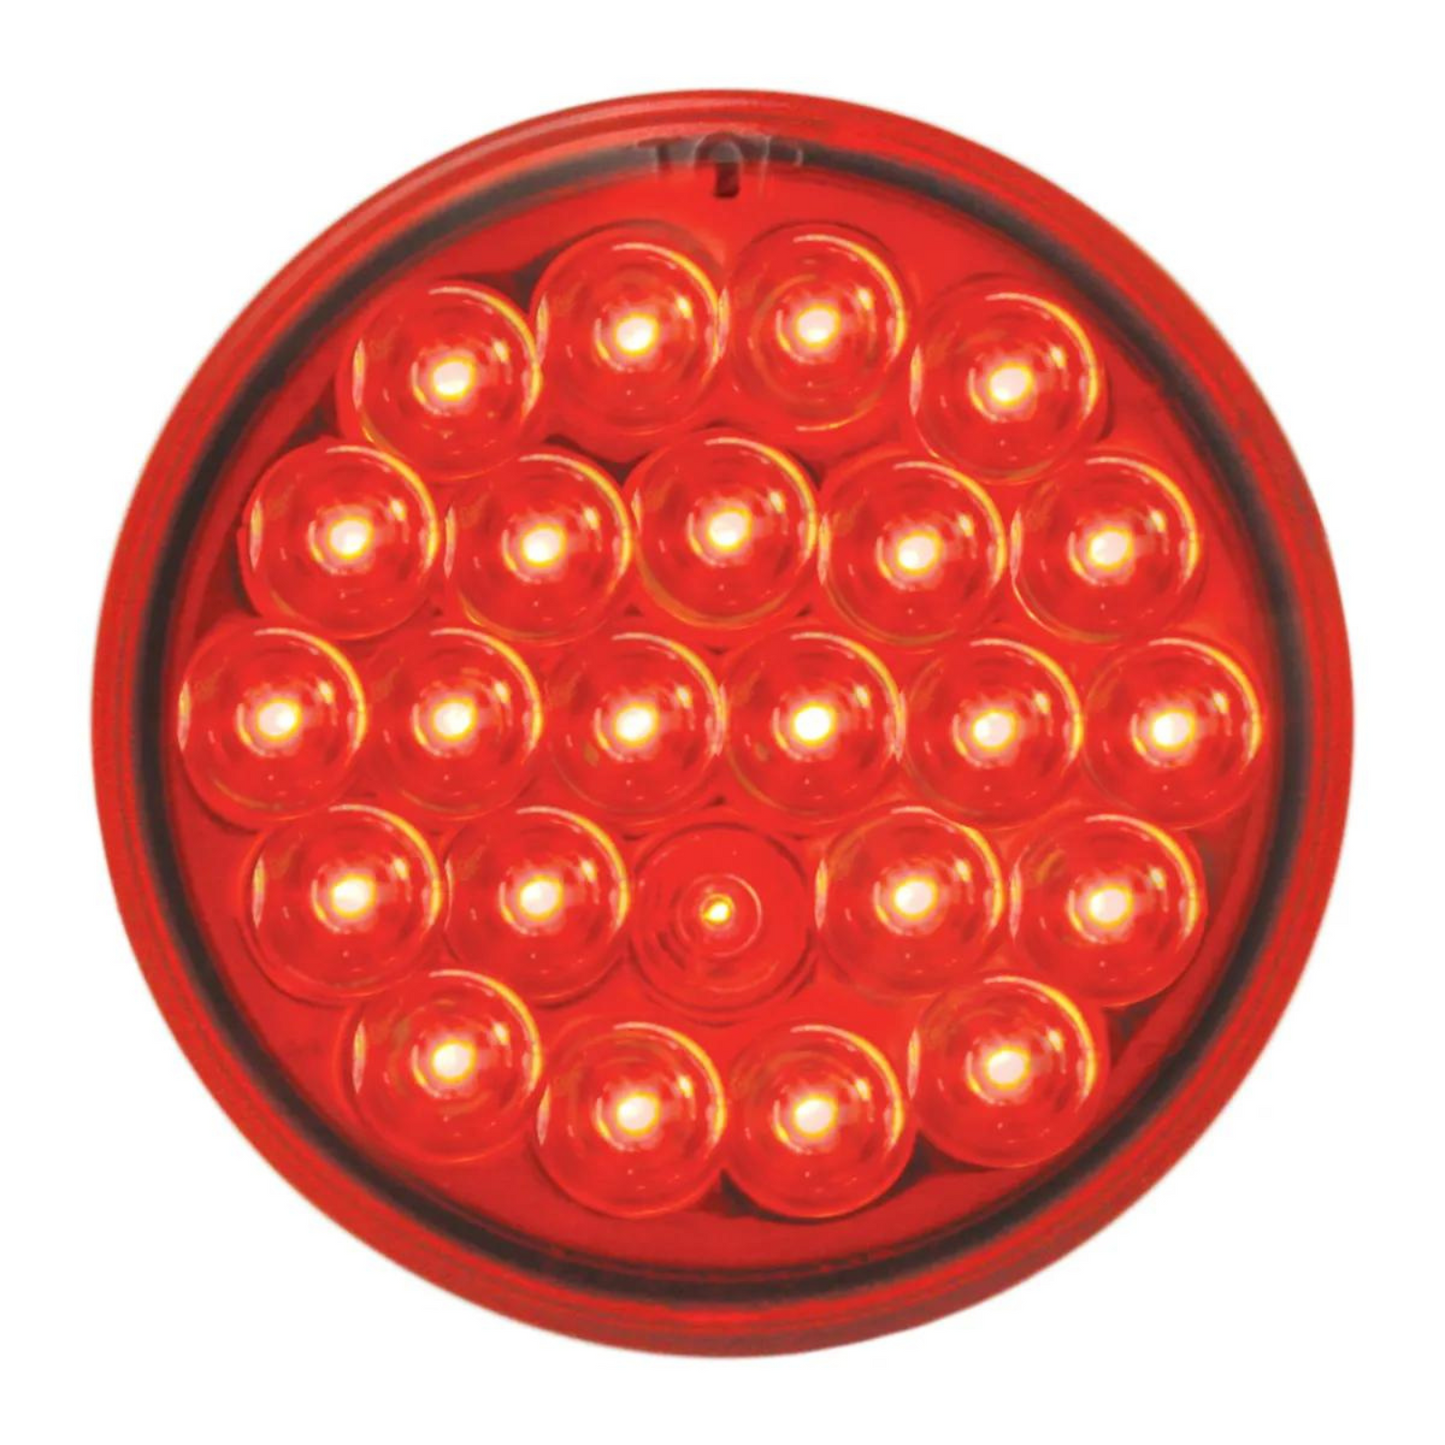 4” Pearl 24 LED Light in Red